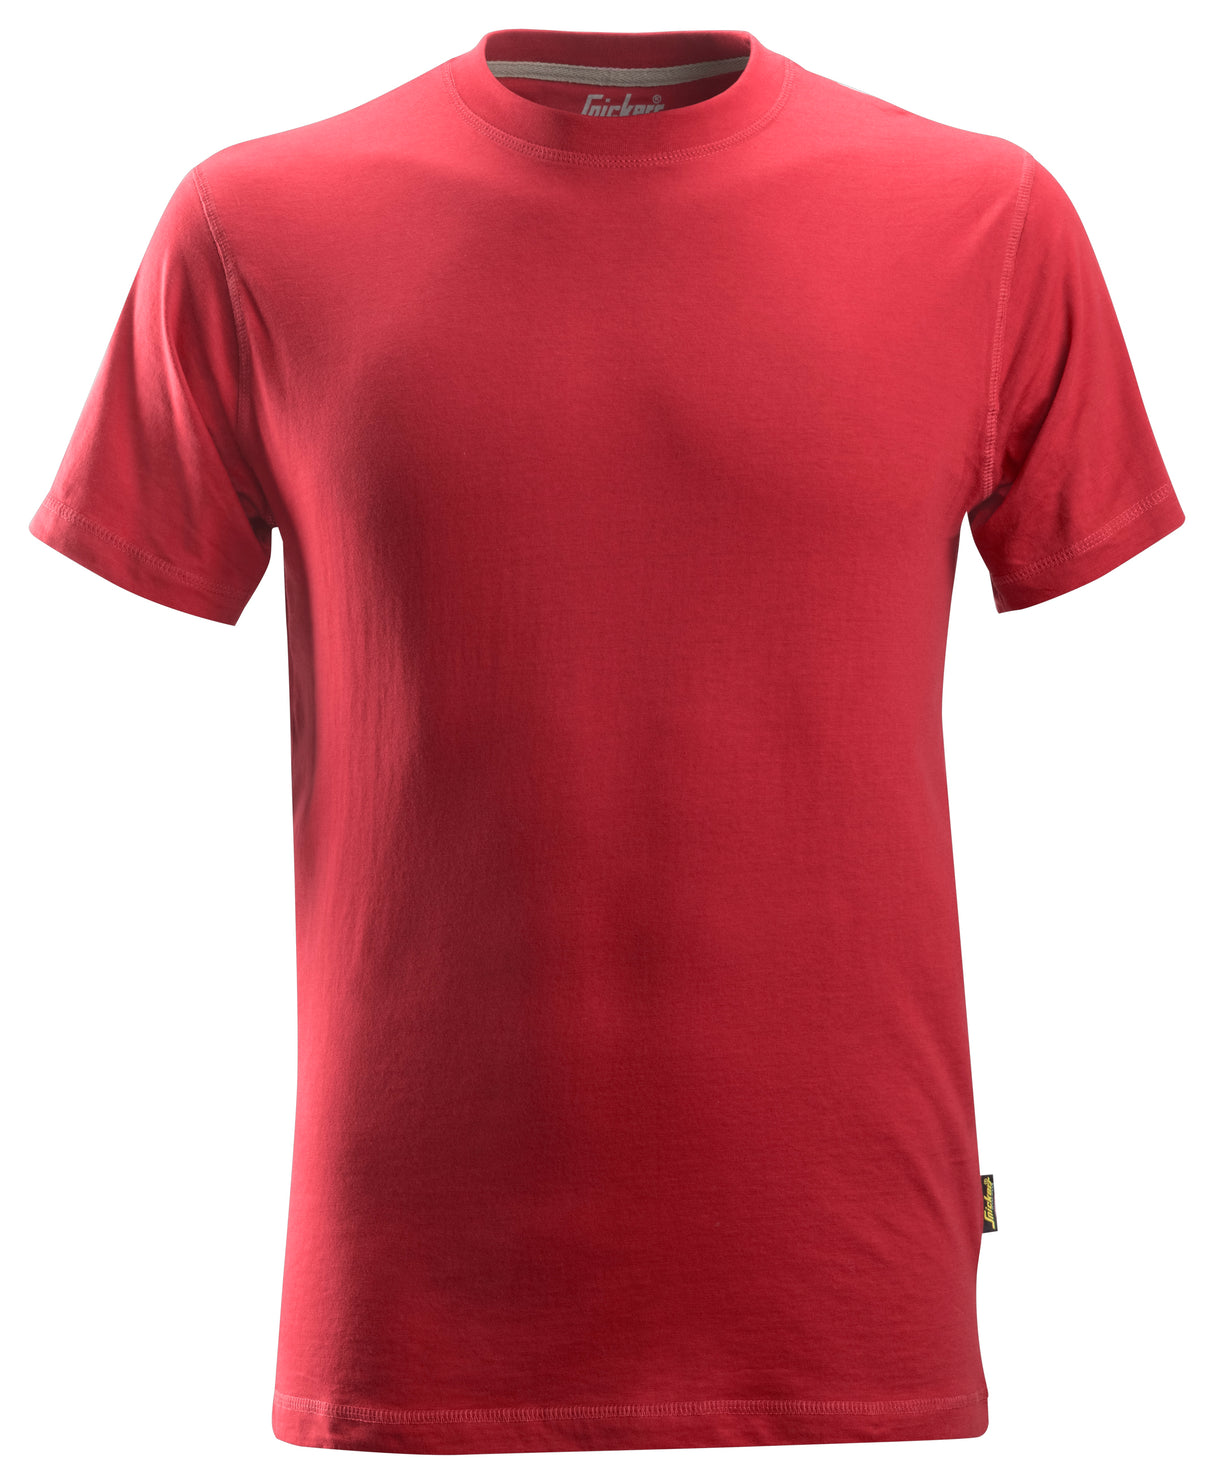 Snickers Classic T-Shirt Chili Red (2502)